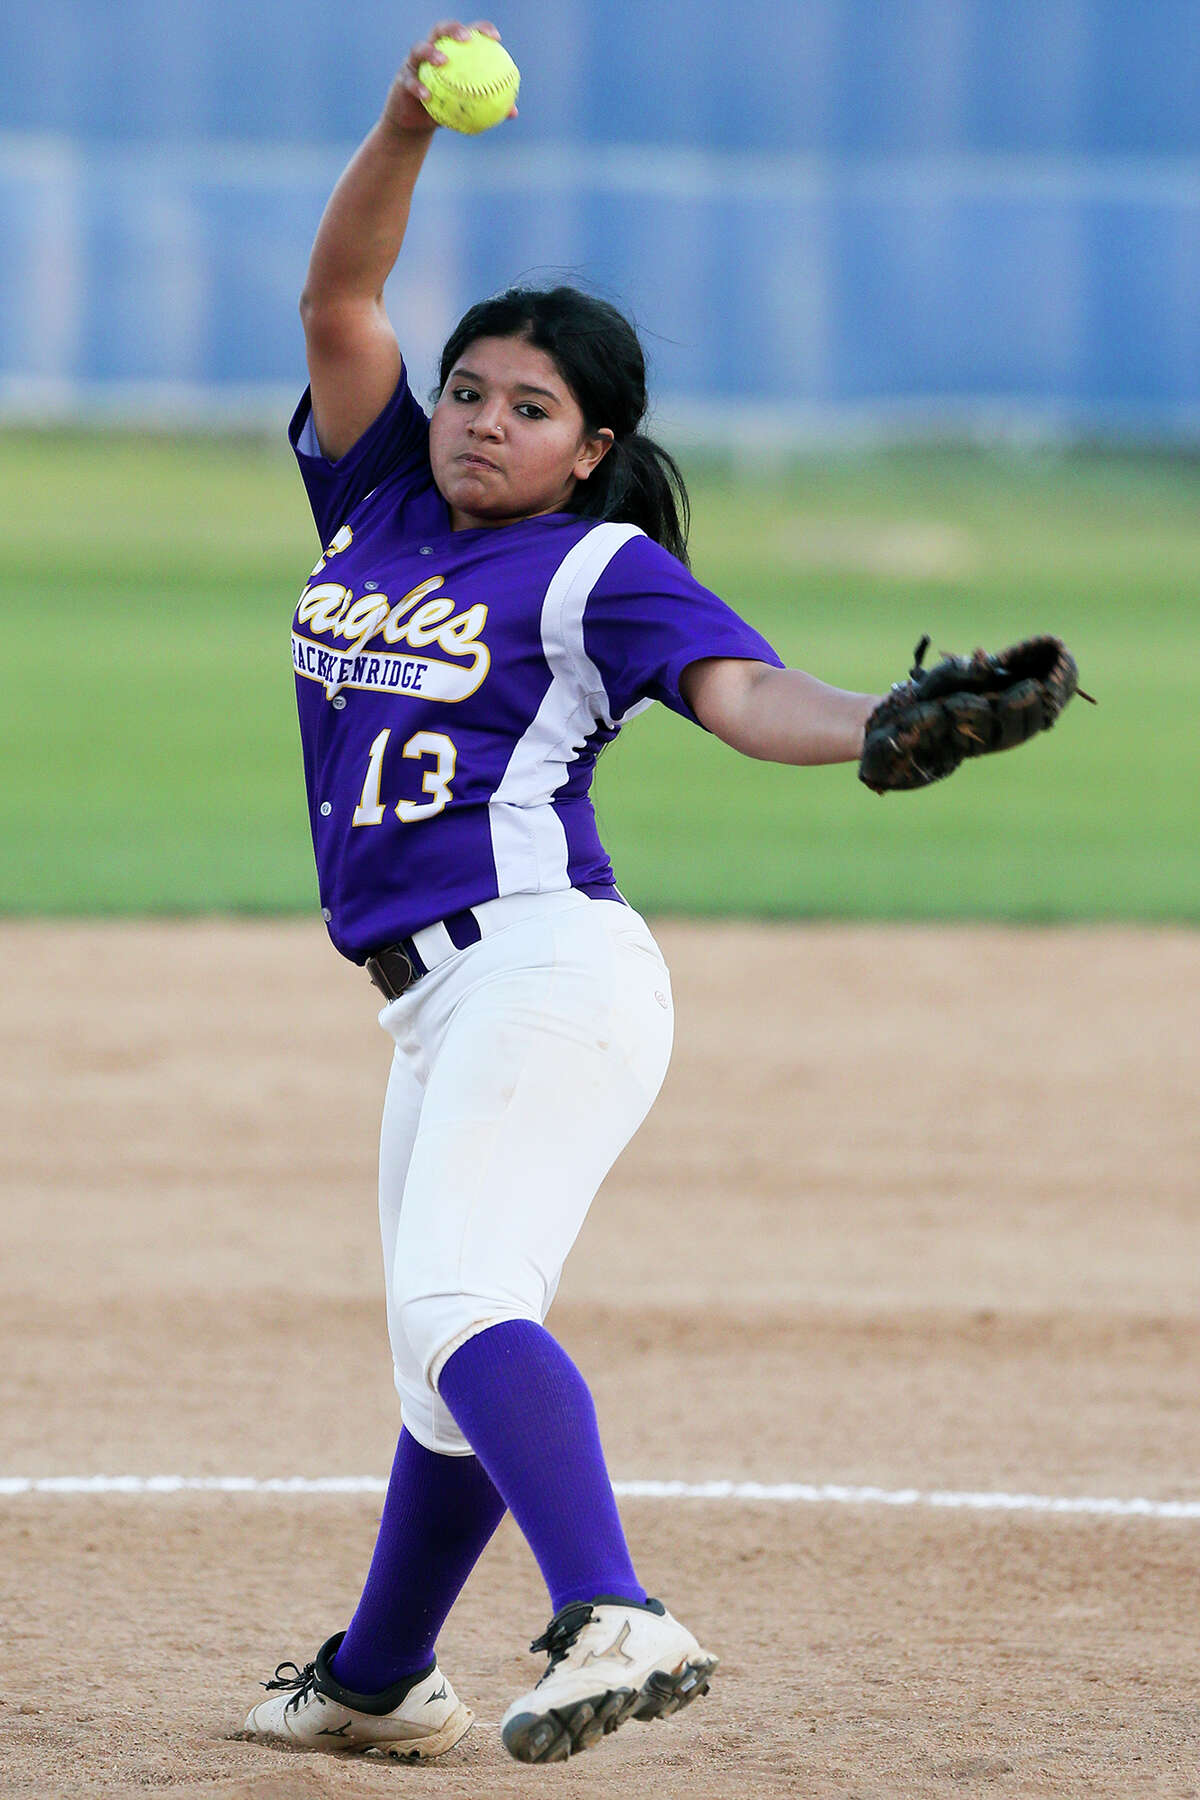 Brackenridge's Shyleen Yanez throws to the plate during the first inning of their District 28-5A game with Highlands at the Mary Ann Villarreal Sports Complex on Tuesday, March 22, 2016. Brackenridge scored seven runs with two outs in the seventh inning to beat Highlands 10-7. MARVIN PFEIFFER/ mpfeiffer@express-news.net